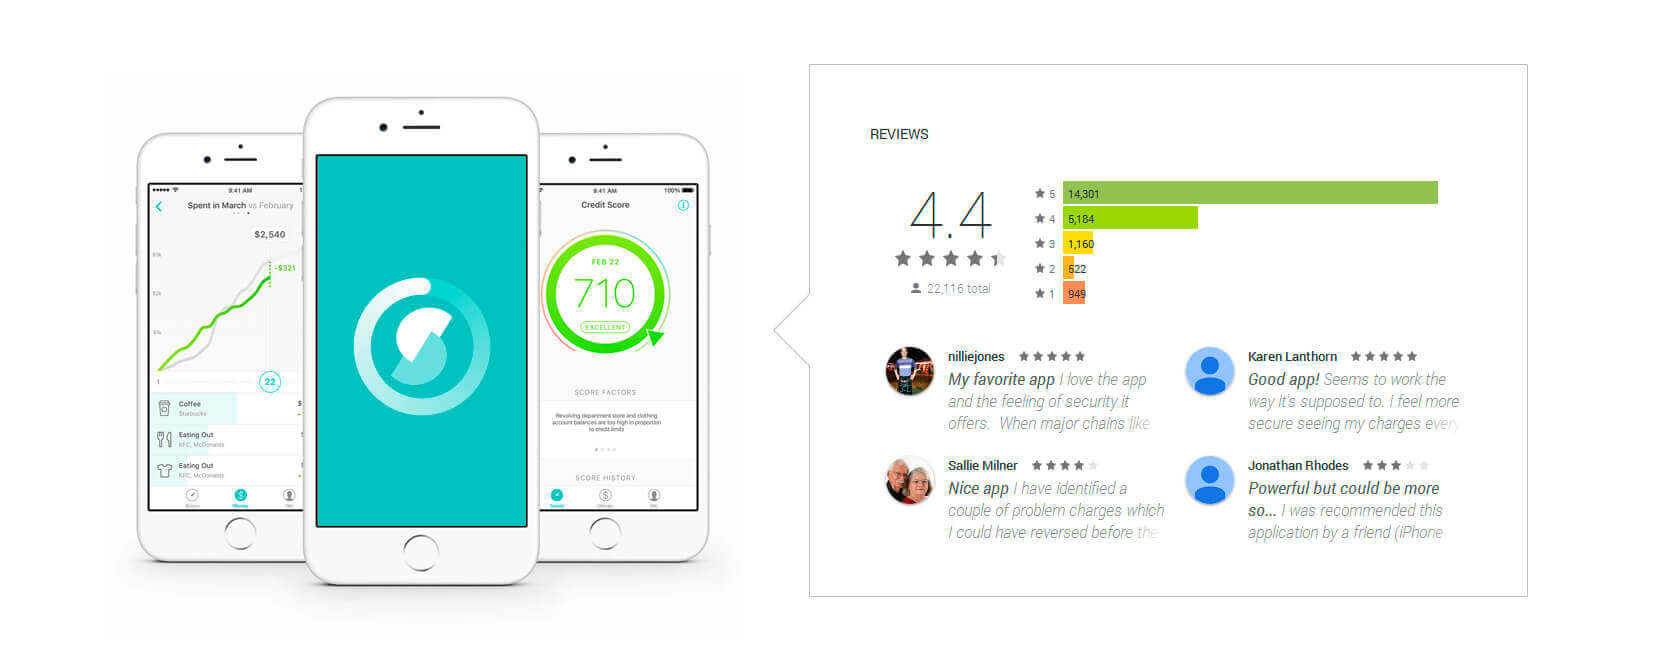 Get Real With User Reviews in Your Mobile Ads